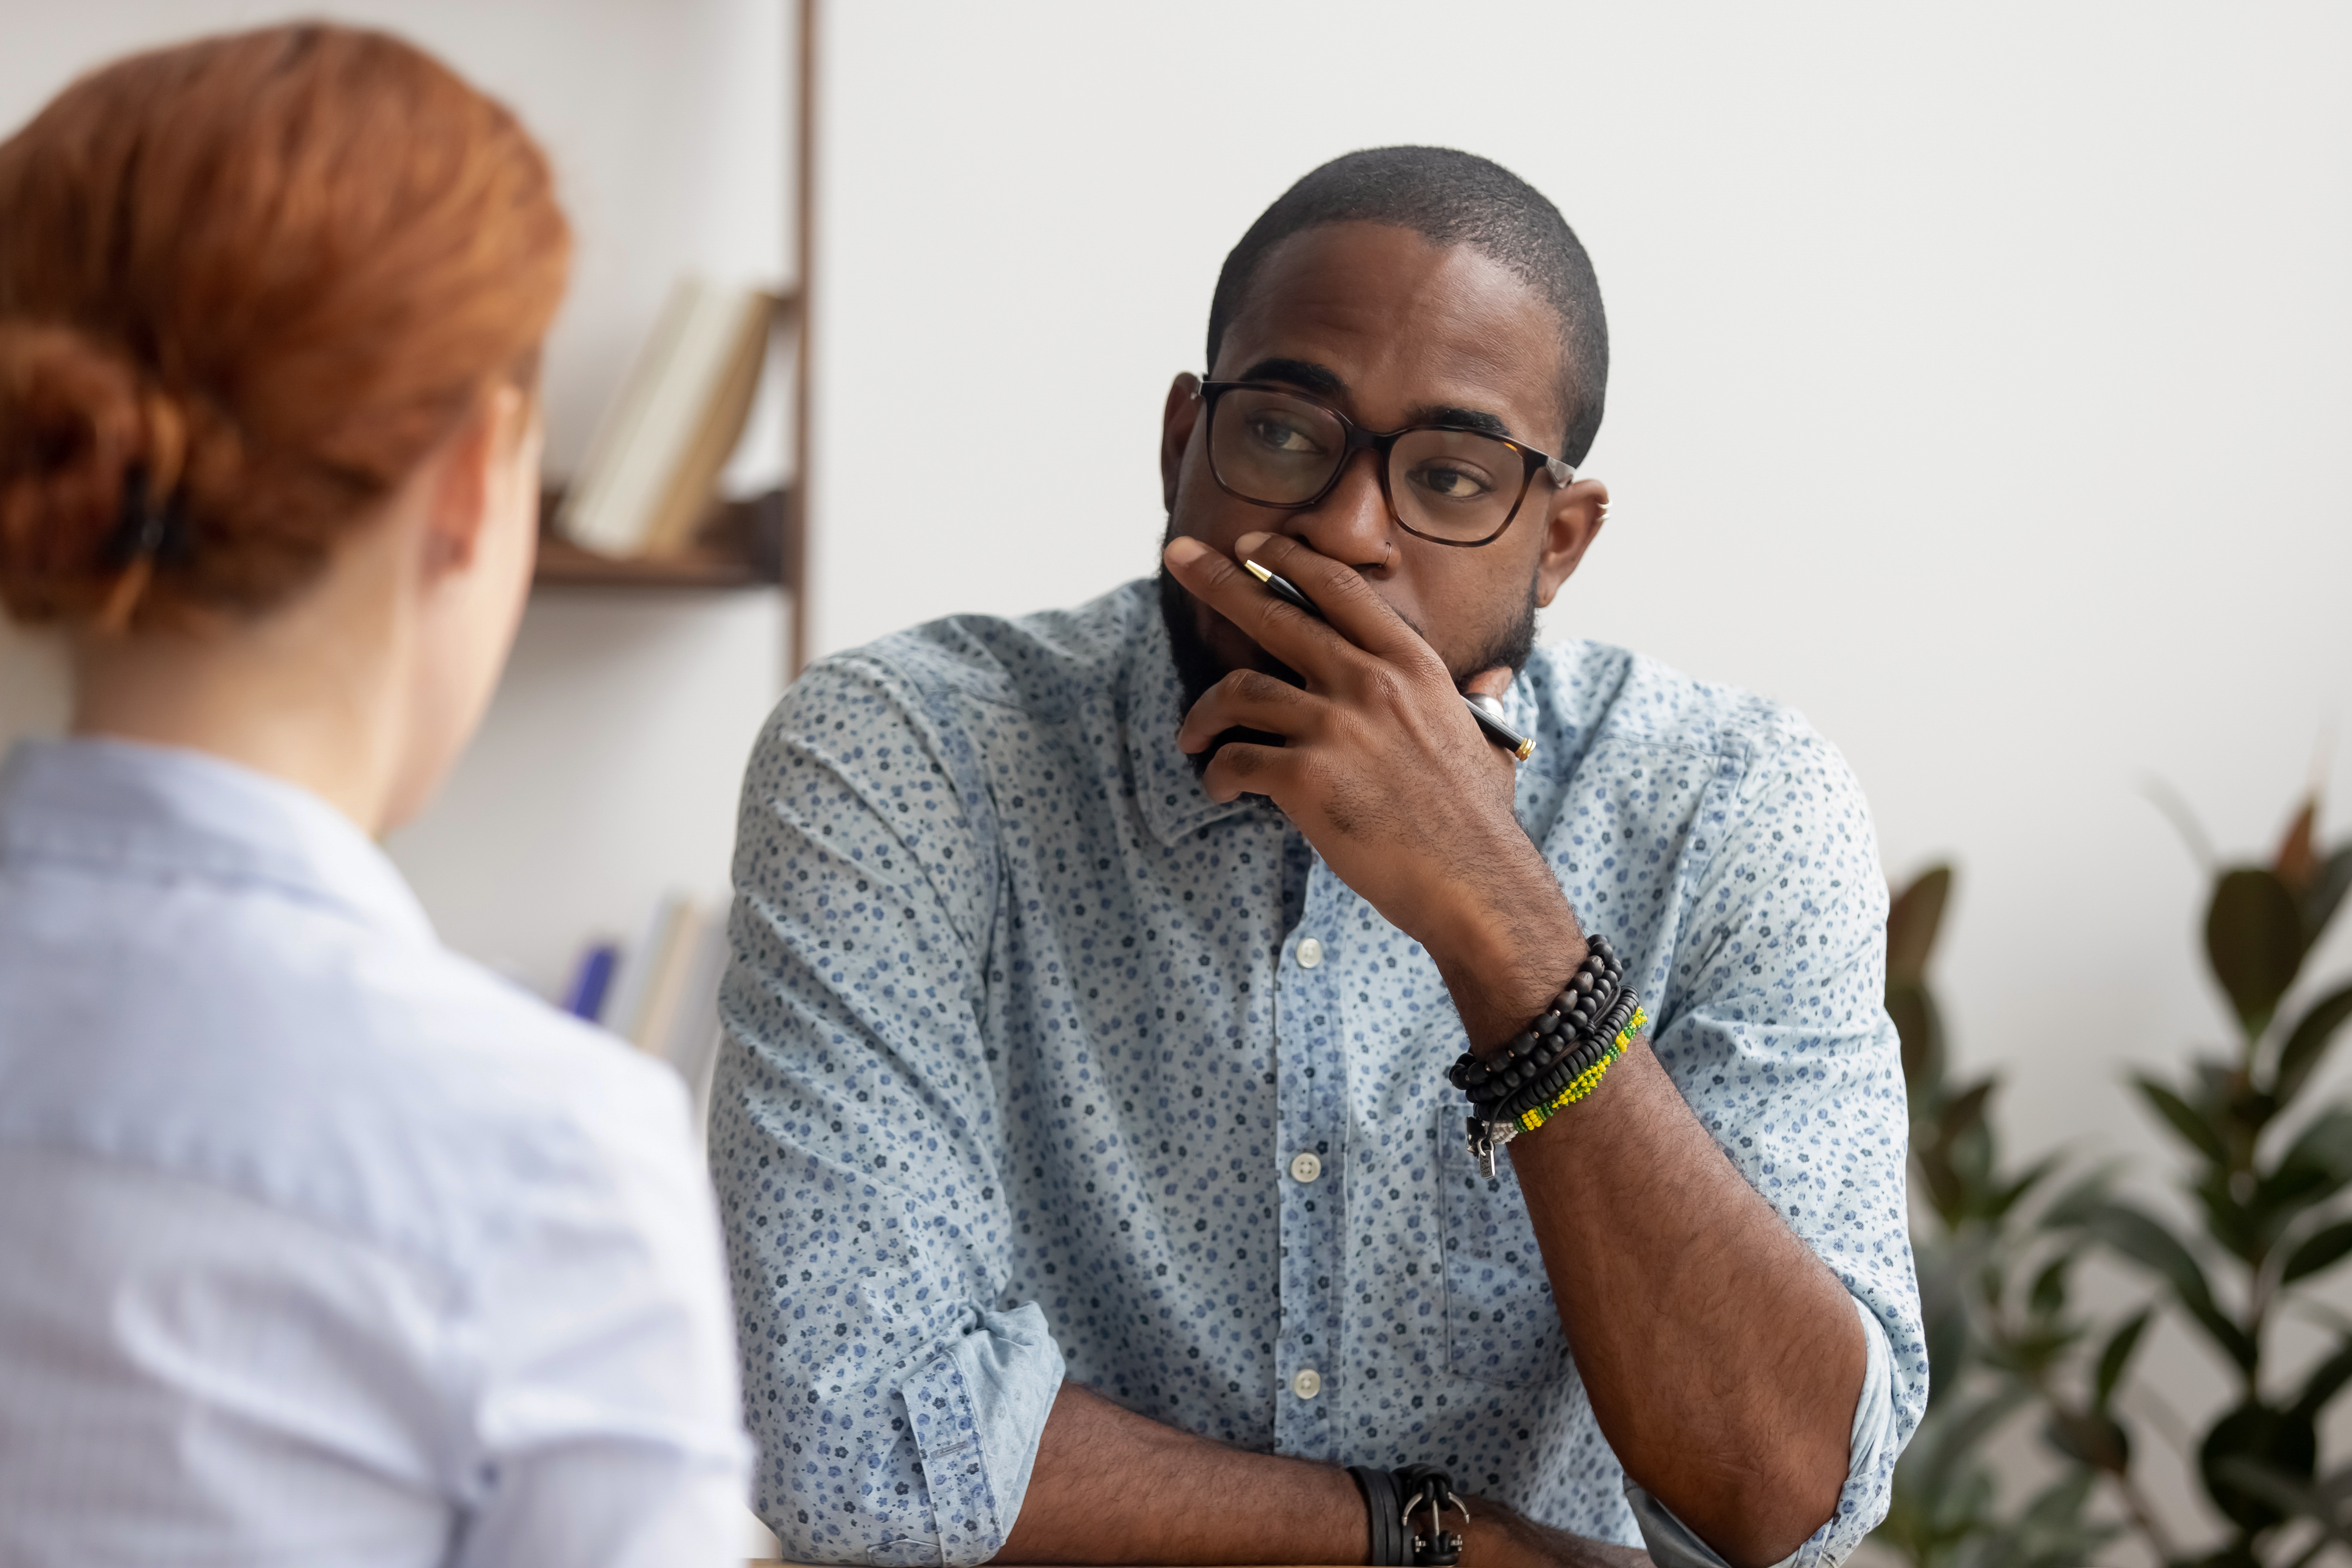 Doubtful unconvinced african american hr manager talking to caucasian applicant at job interview feeling skeptic rejecting seeker skill, bad first impression, lack of experience or failed performance